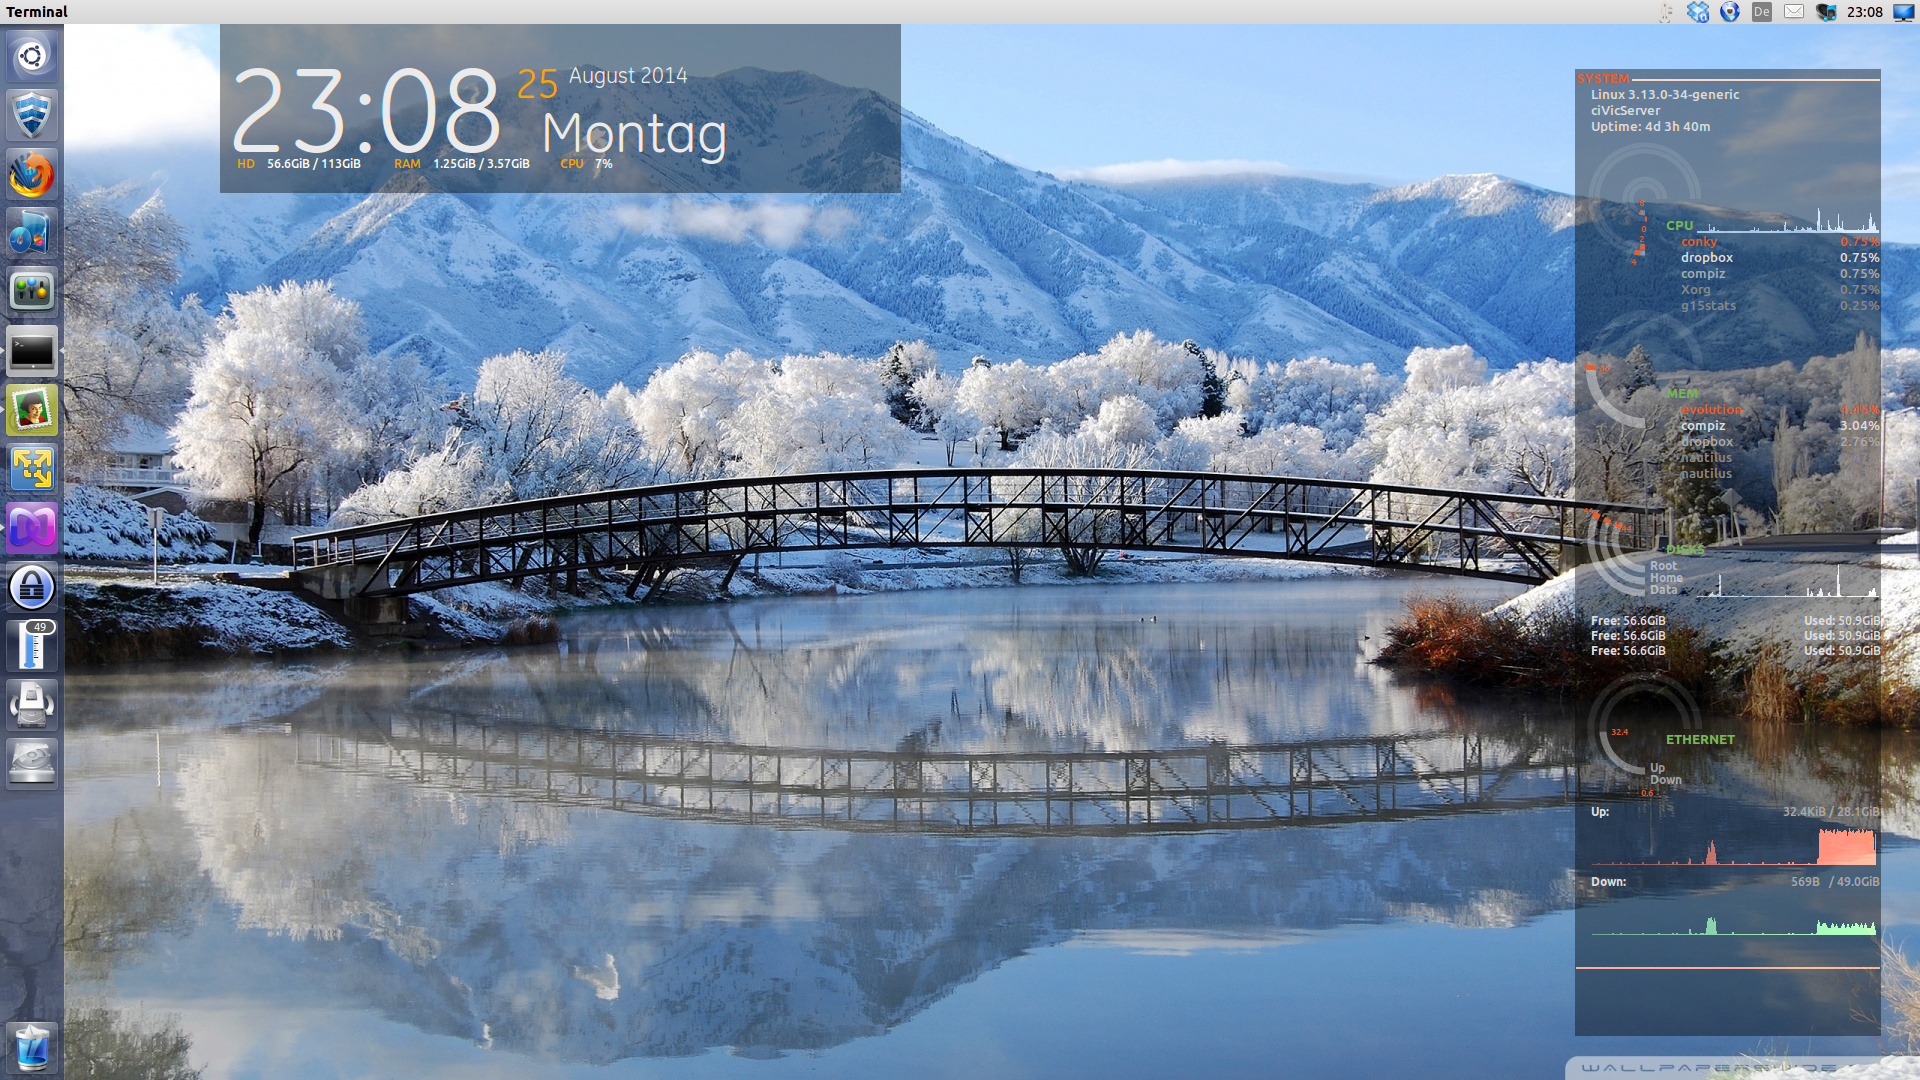 Howto time-controlled change the wallpaper and theme in Ubuntu  |  Olli's